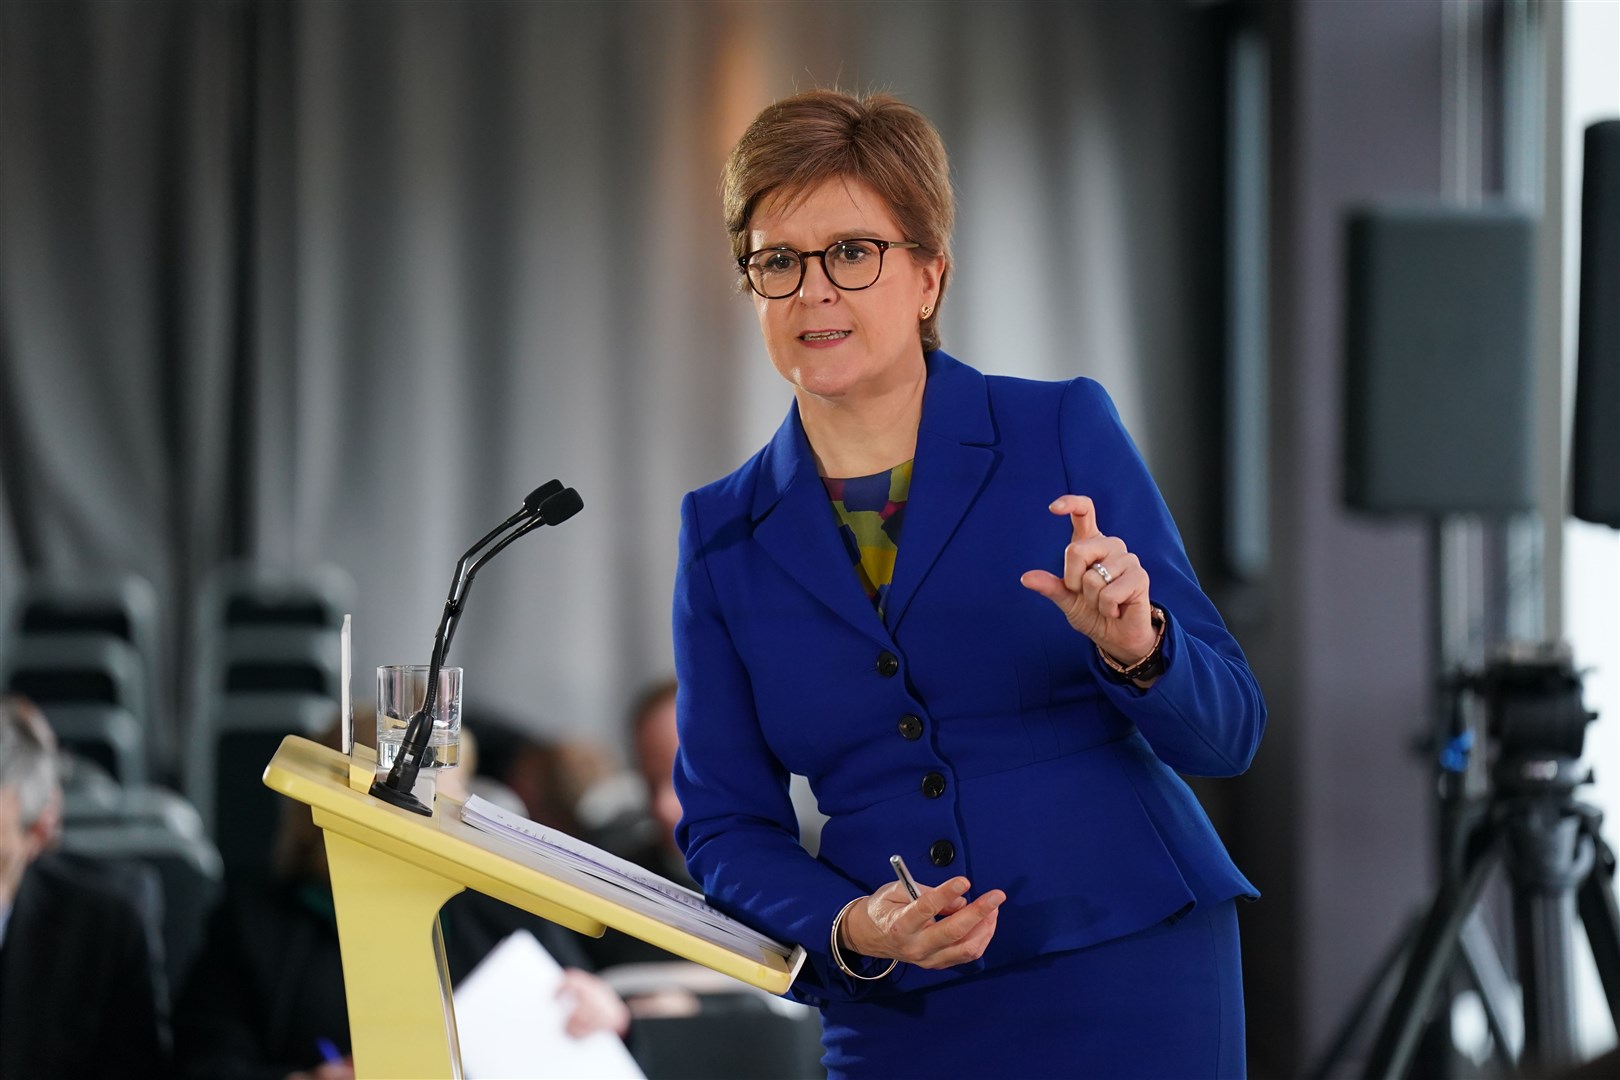 A threat to assassinate Nicola Sturgeon was sent to her office, the court heard (Jane Barlow/PA)